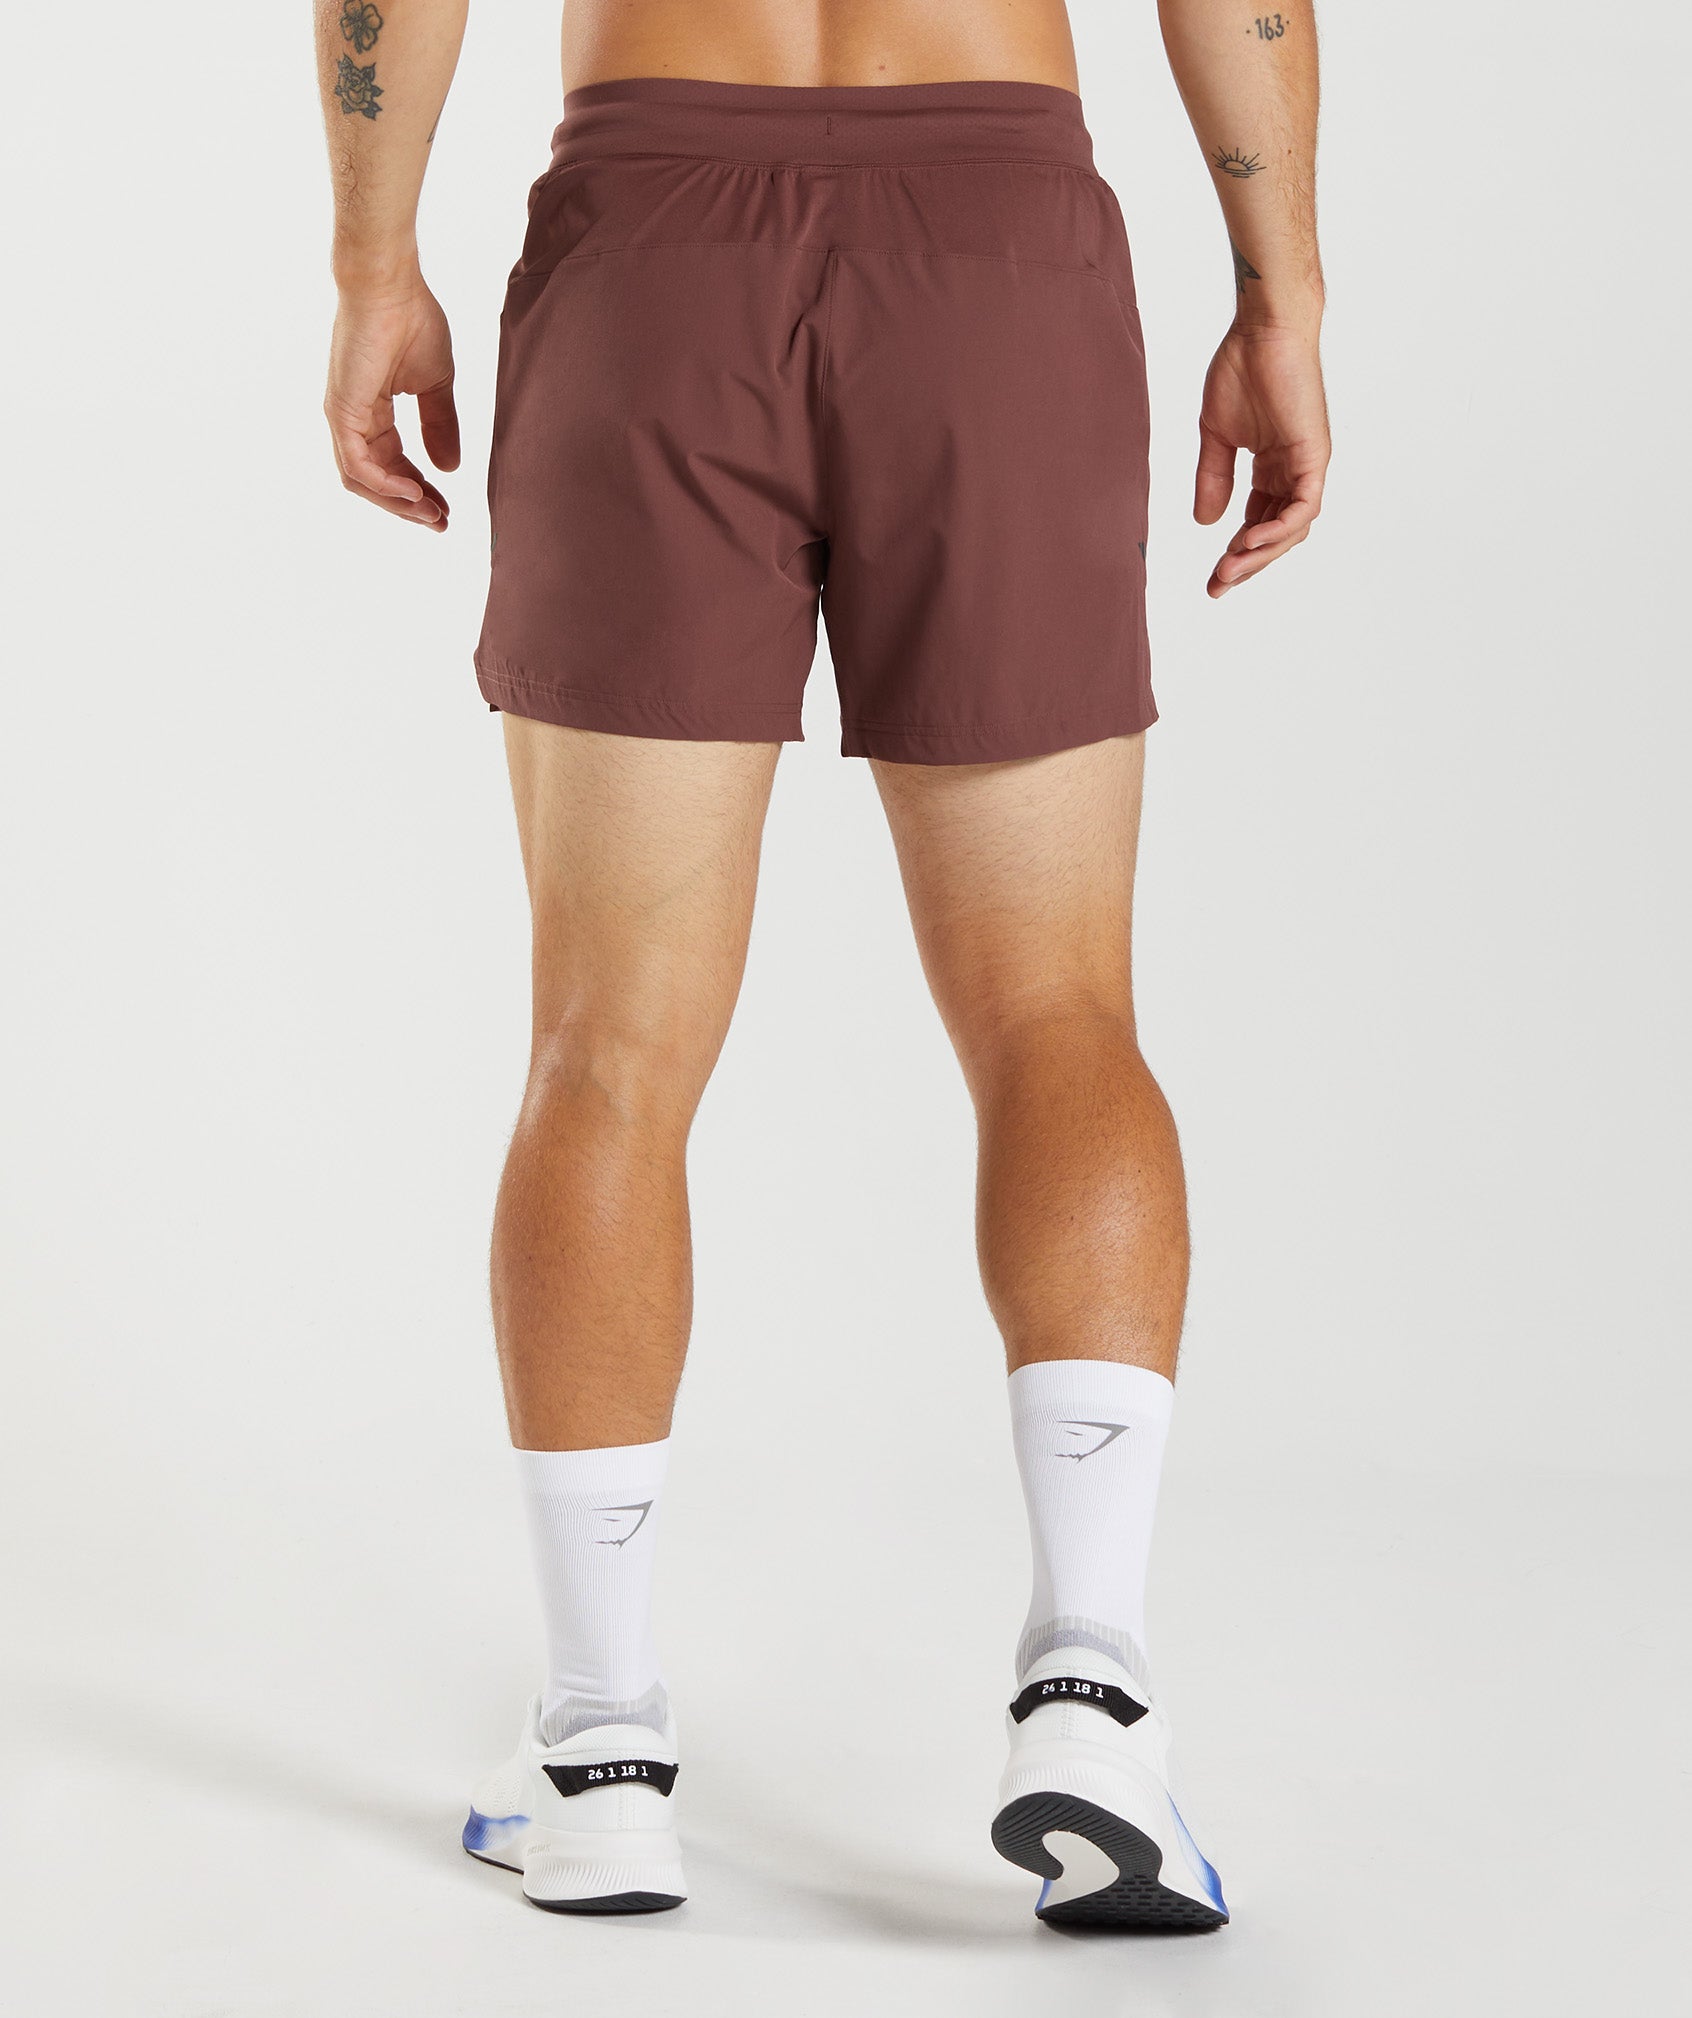 Apex 5" Perform Shorts in Cherry Brown - view 3